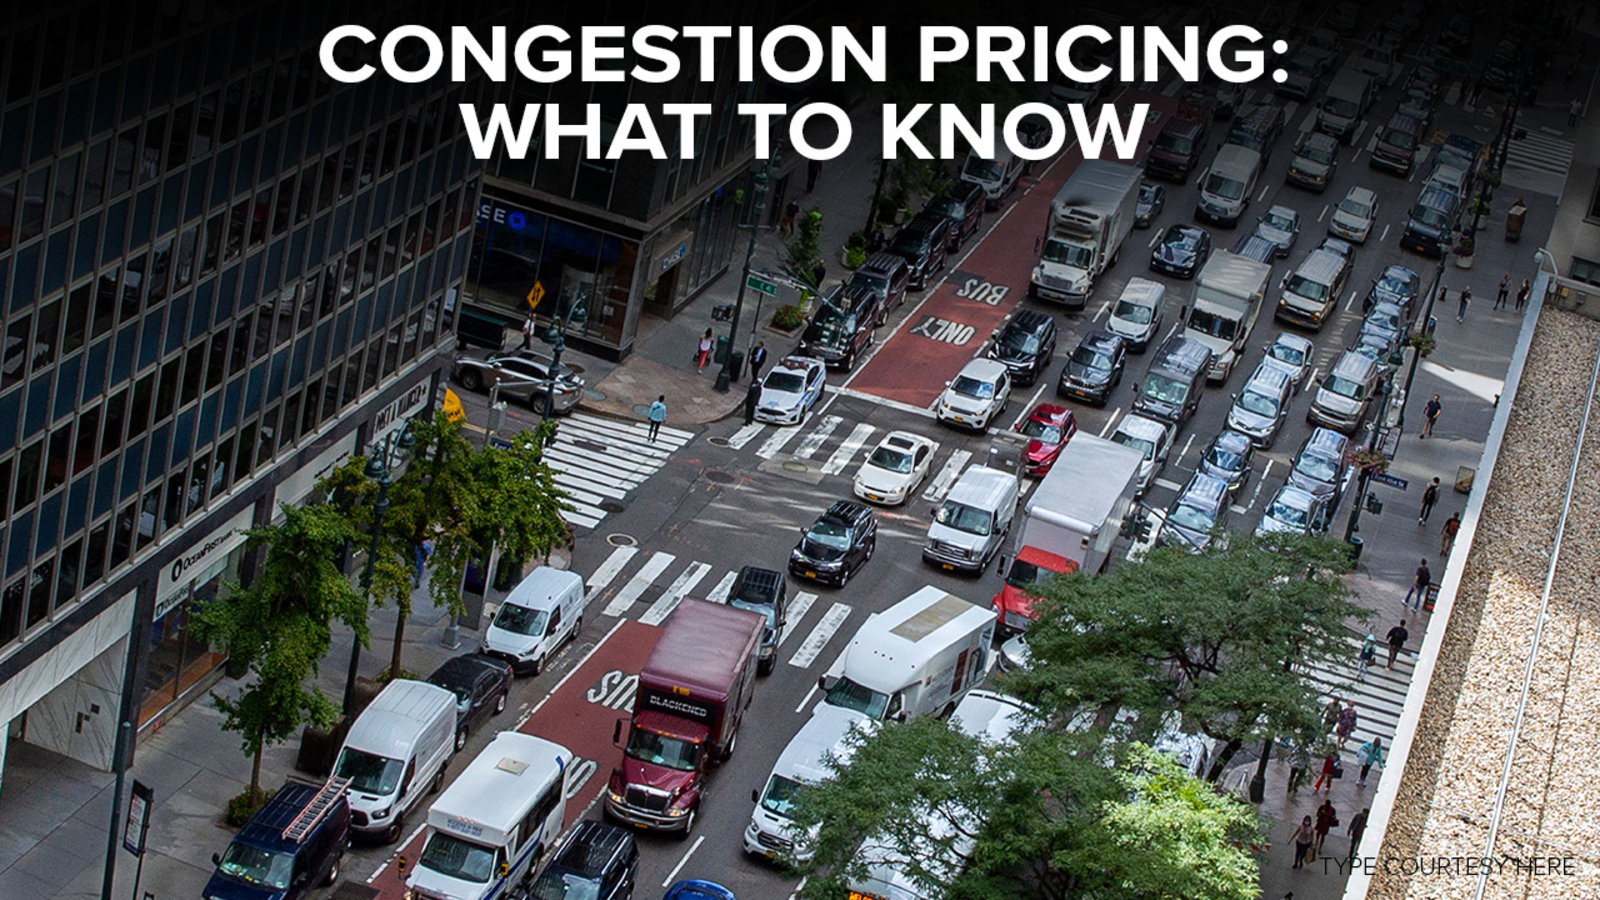 NYC Congestion pricing plan: Start date, tolls, exemptions, MTA New York City zone map [Video]